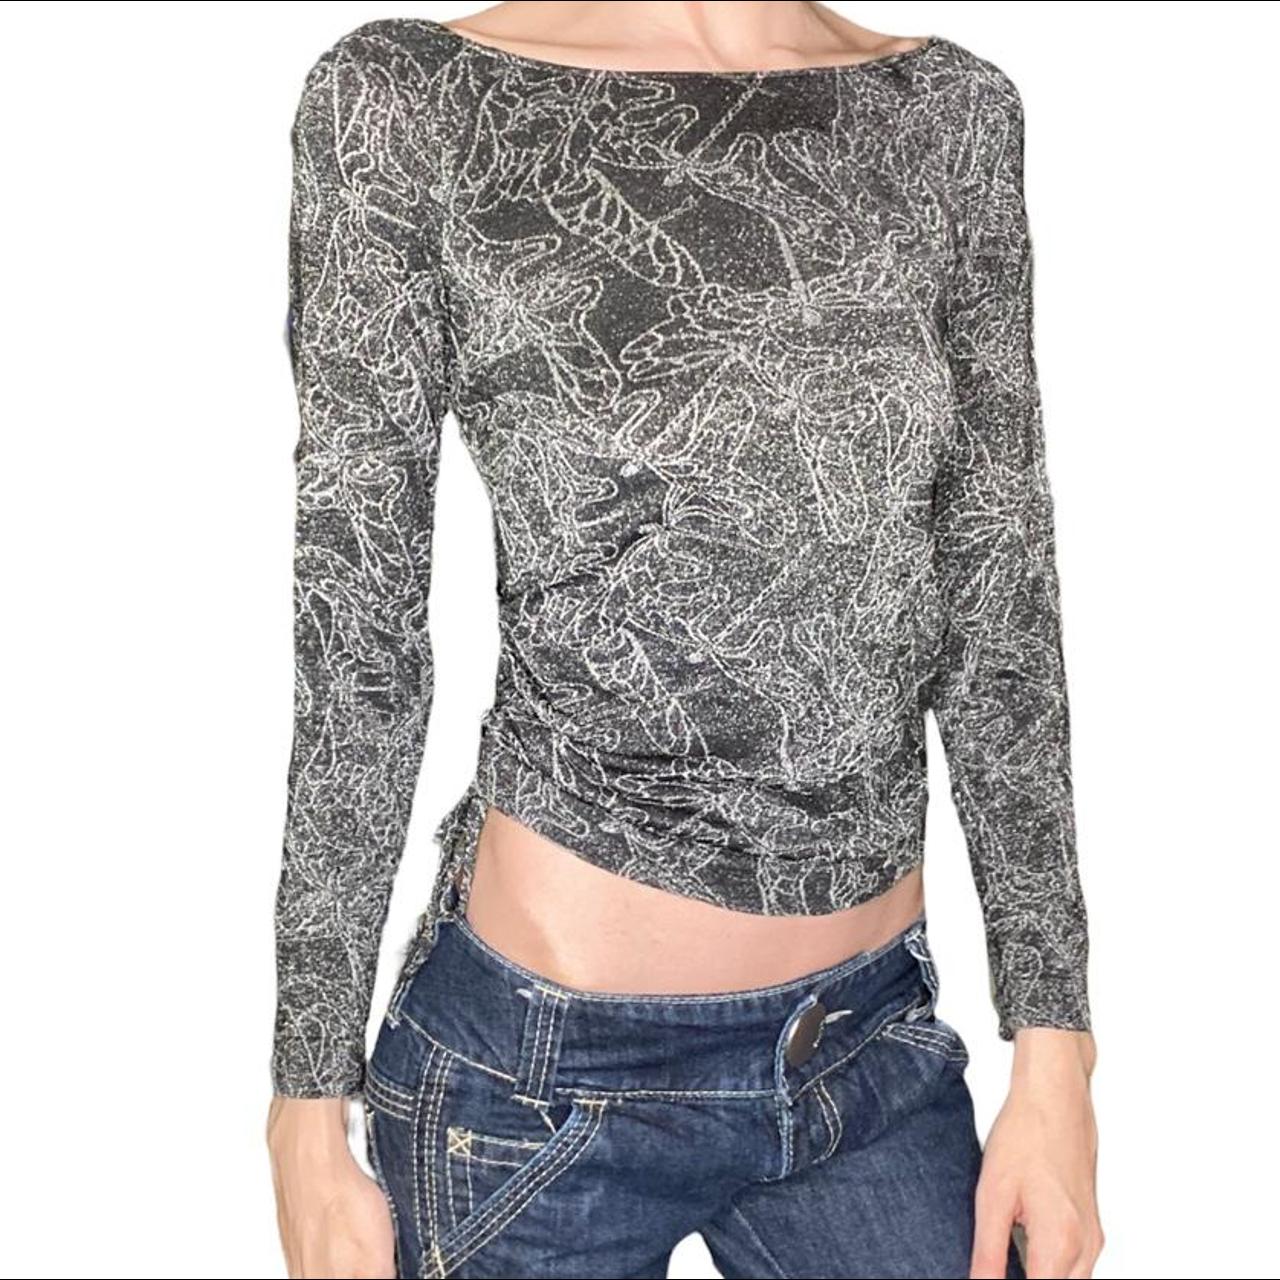 Product Image 1 - Vintage ruched sparkly butterfly top
Brand: